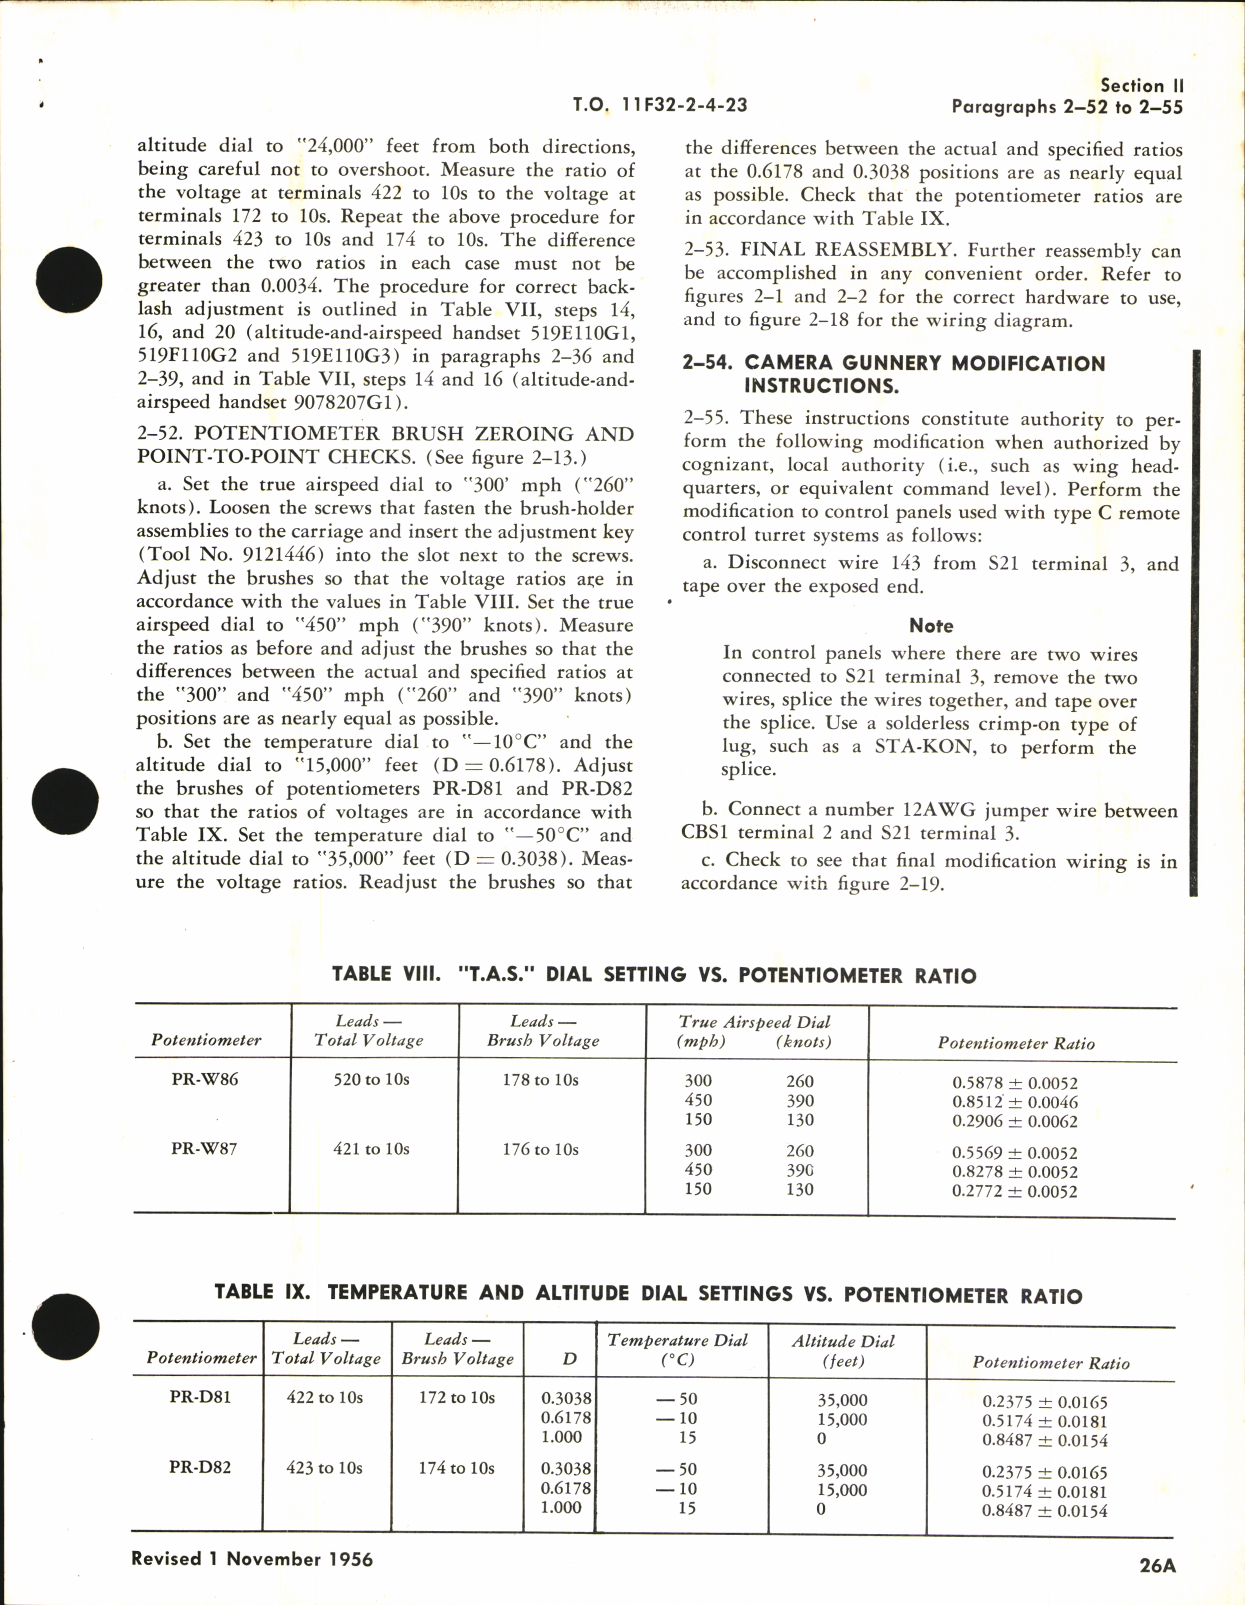 Sample page 5 from AirCorps Library document: Overhaul Instructions for General Electric Control Panels